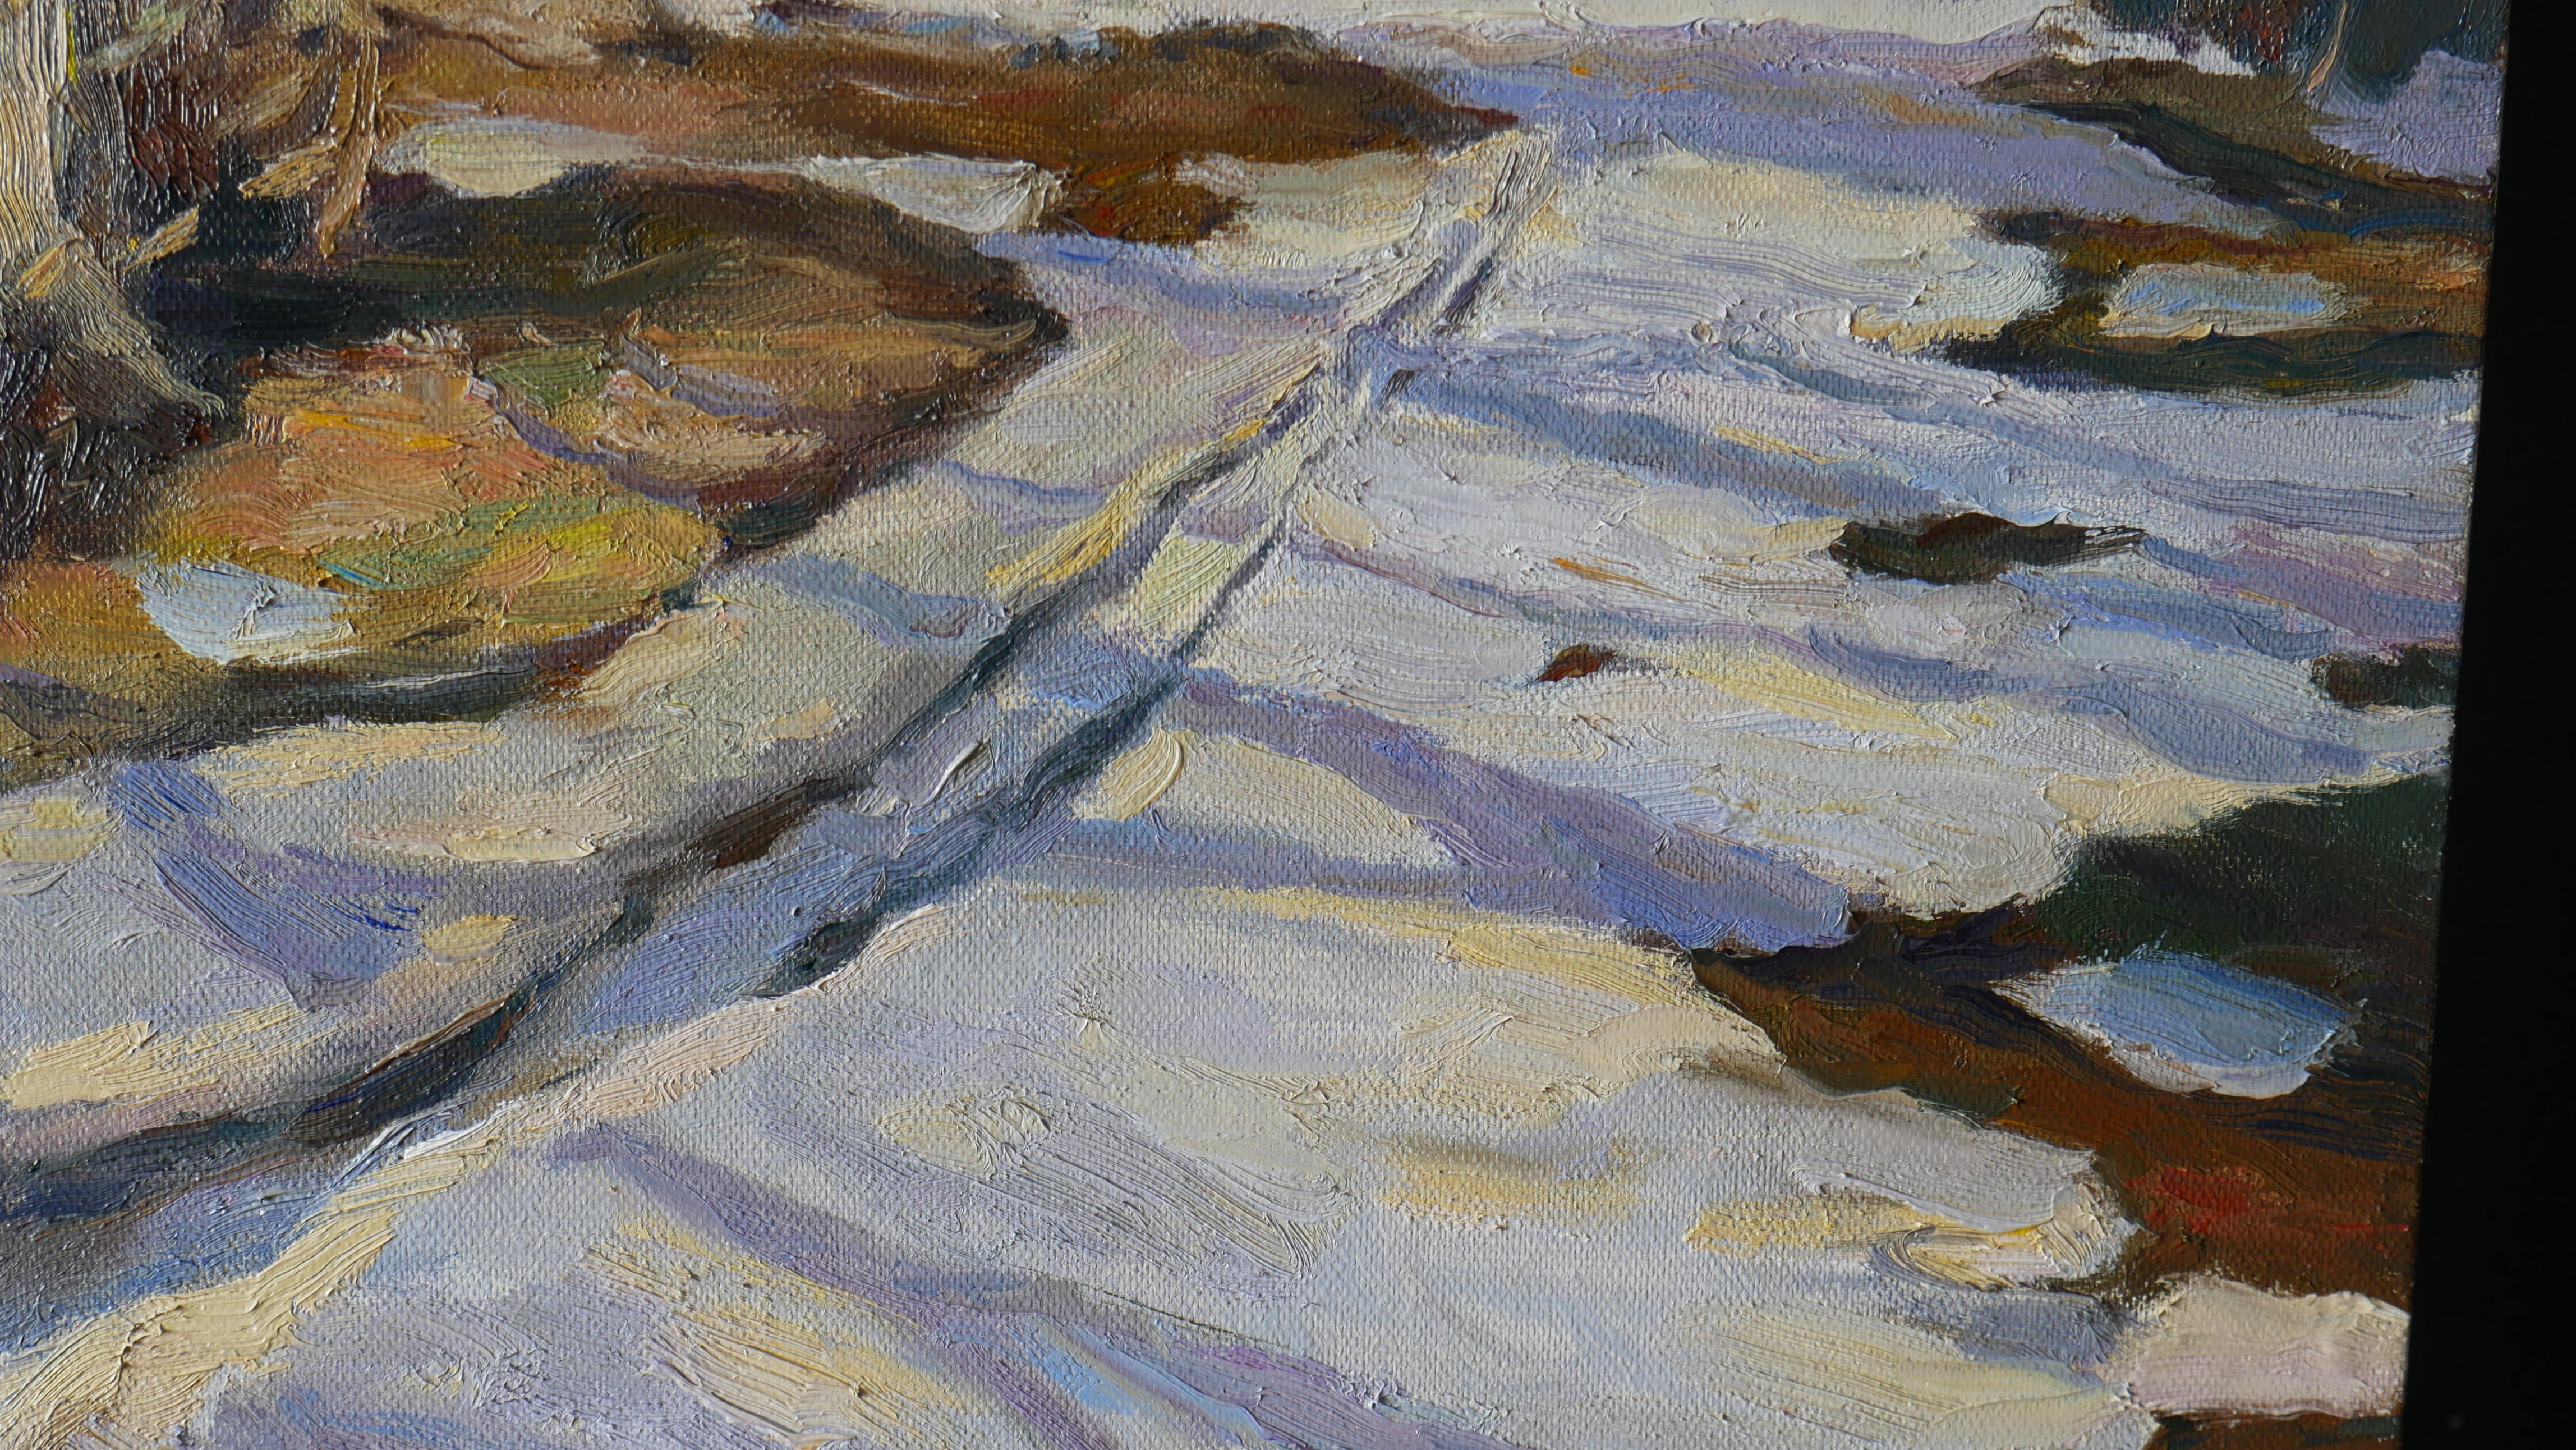 An impressionistic sunny painting with snow, evening sunlight and purple shadows was created un plein air.
The evening spring Sun creates incredible combinations of warm and cold colors on white snow. Nature wakes up after a long winter and prepares